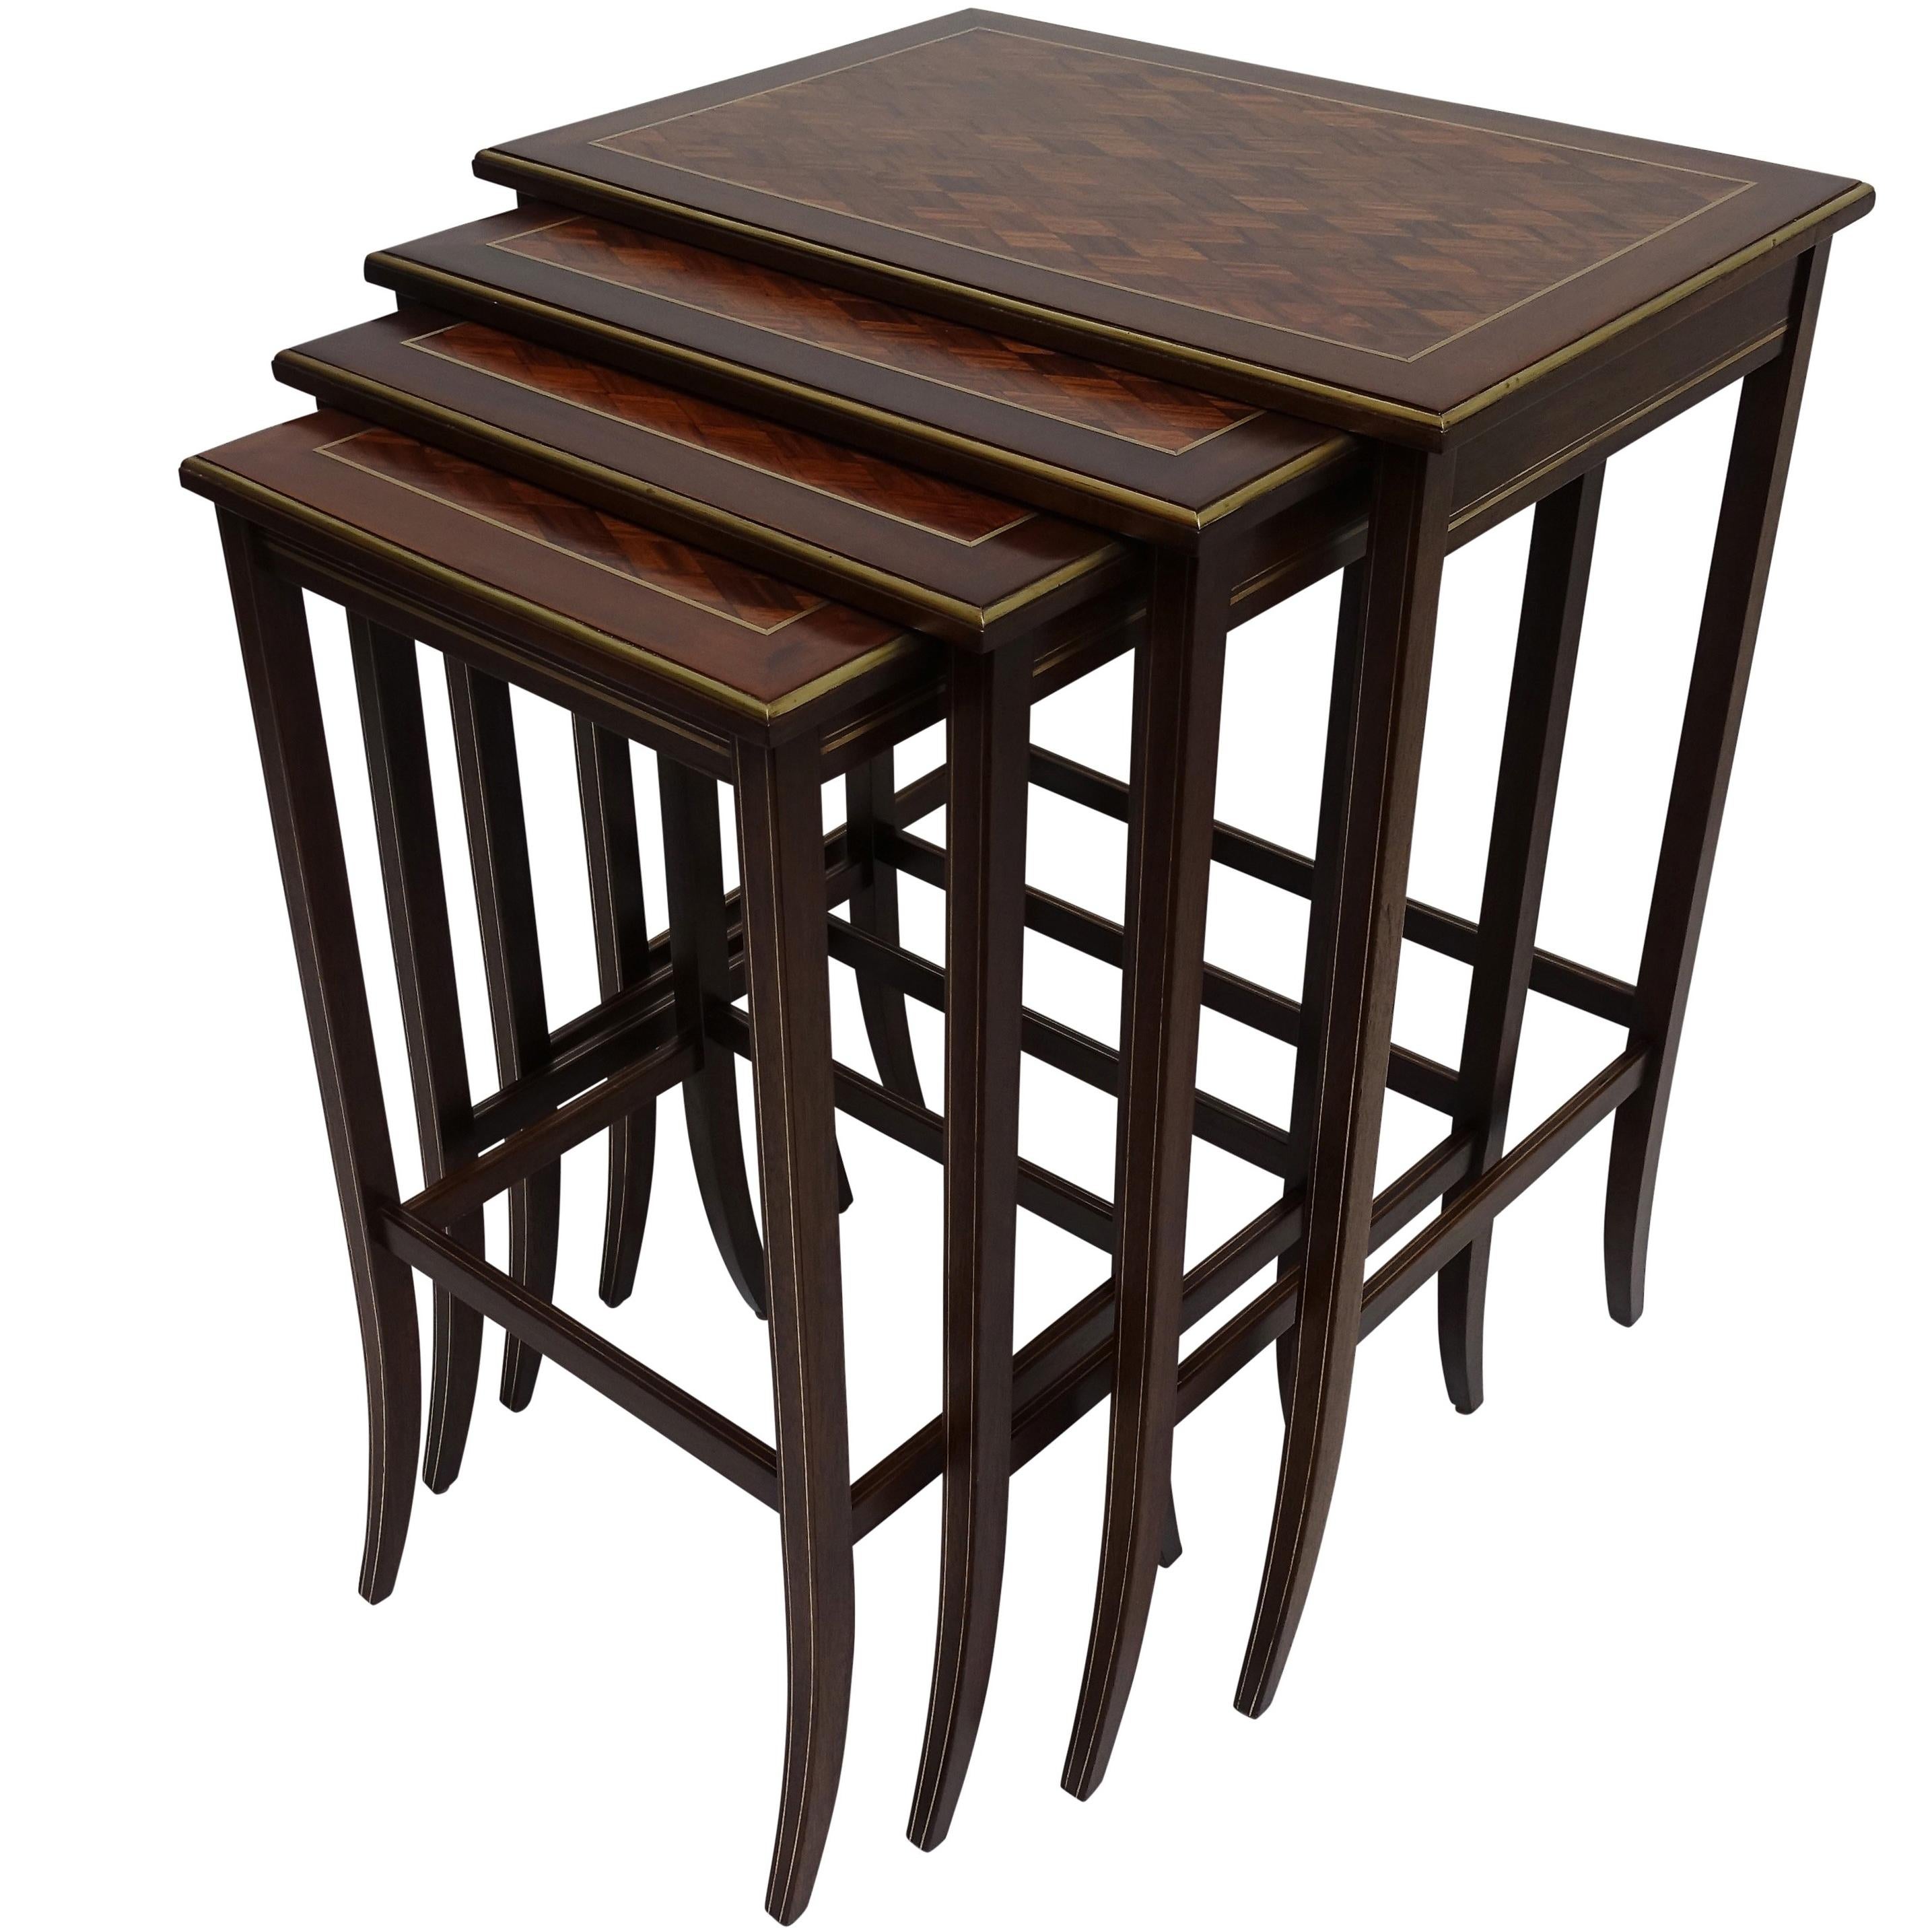 Set of Four Mahogany Nesting Tables with Brass Inlay and Trim, Mid-20th Century